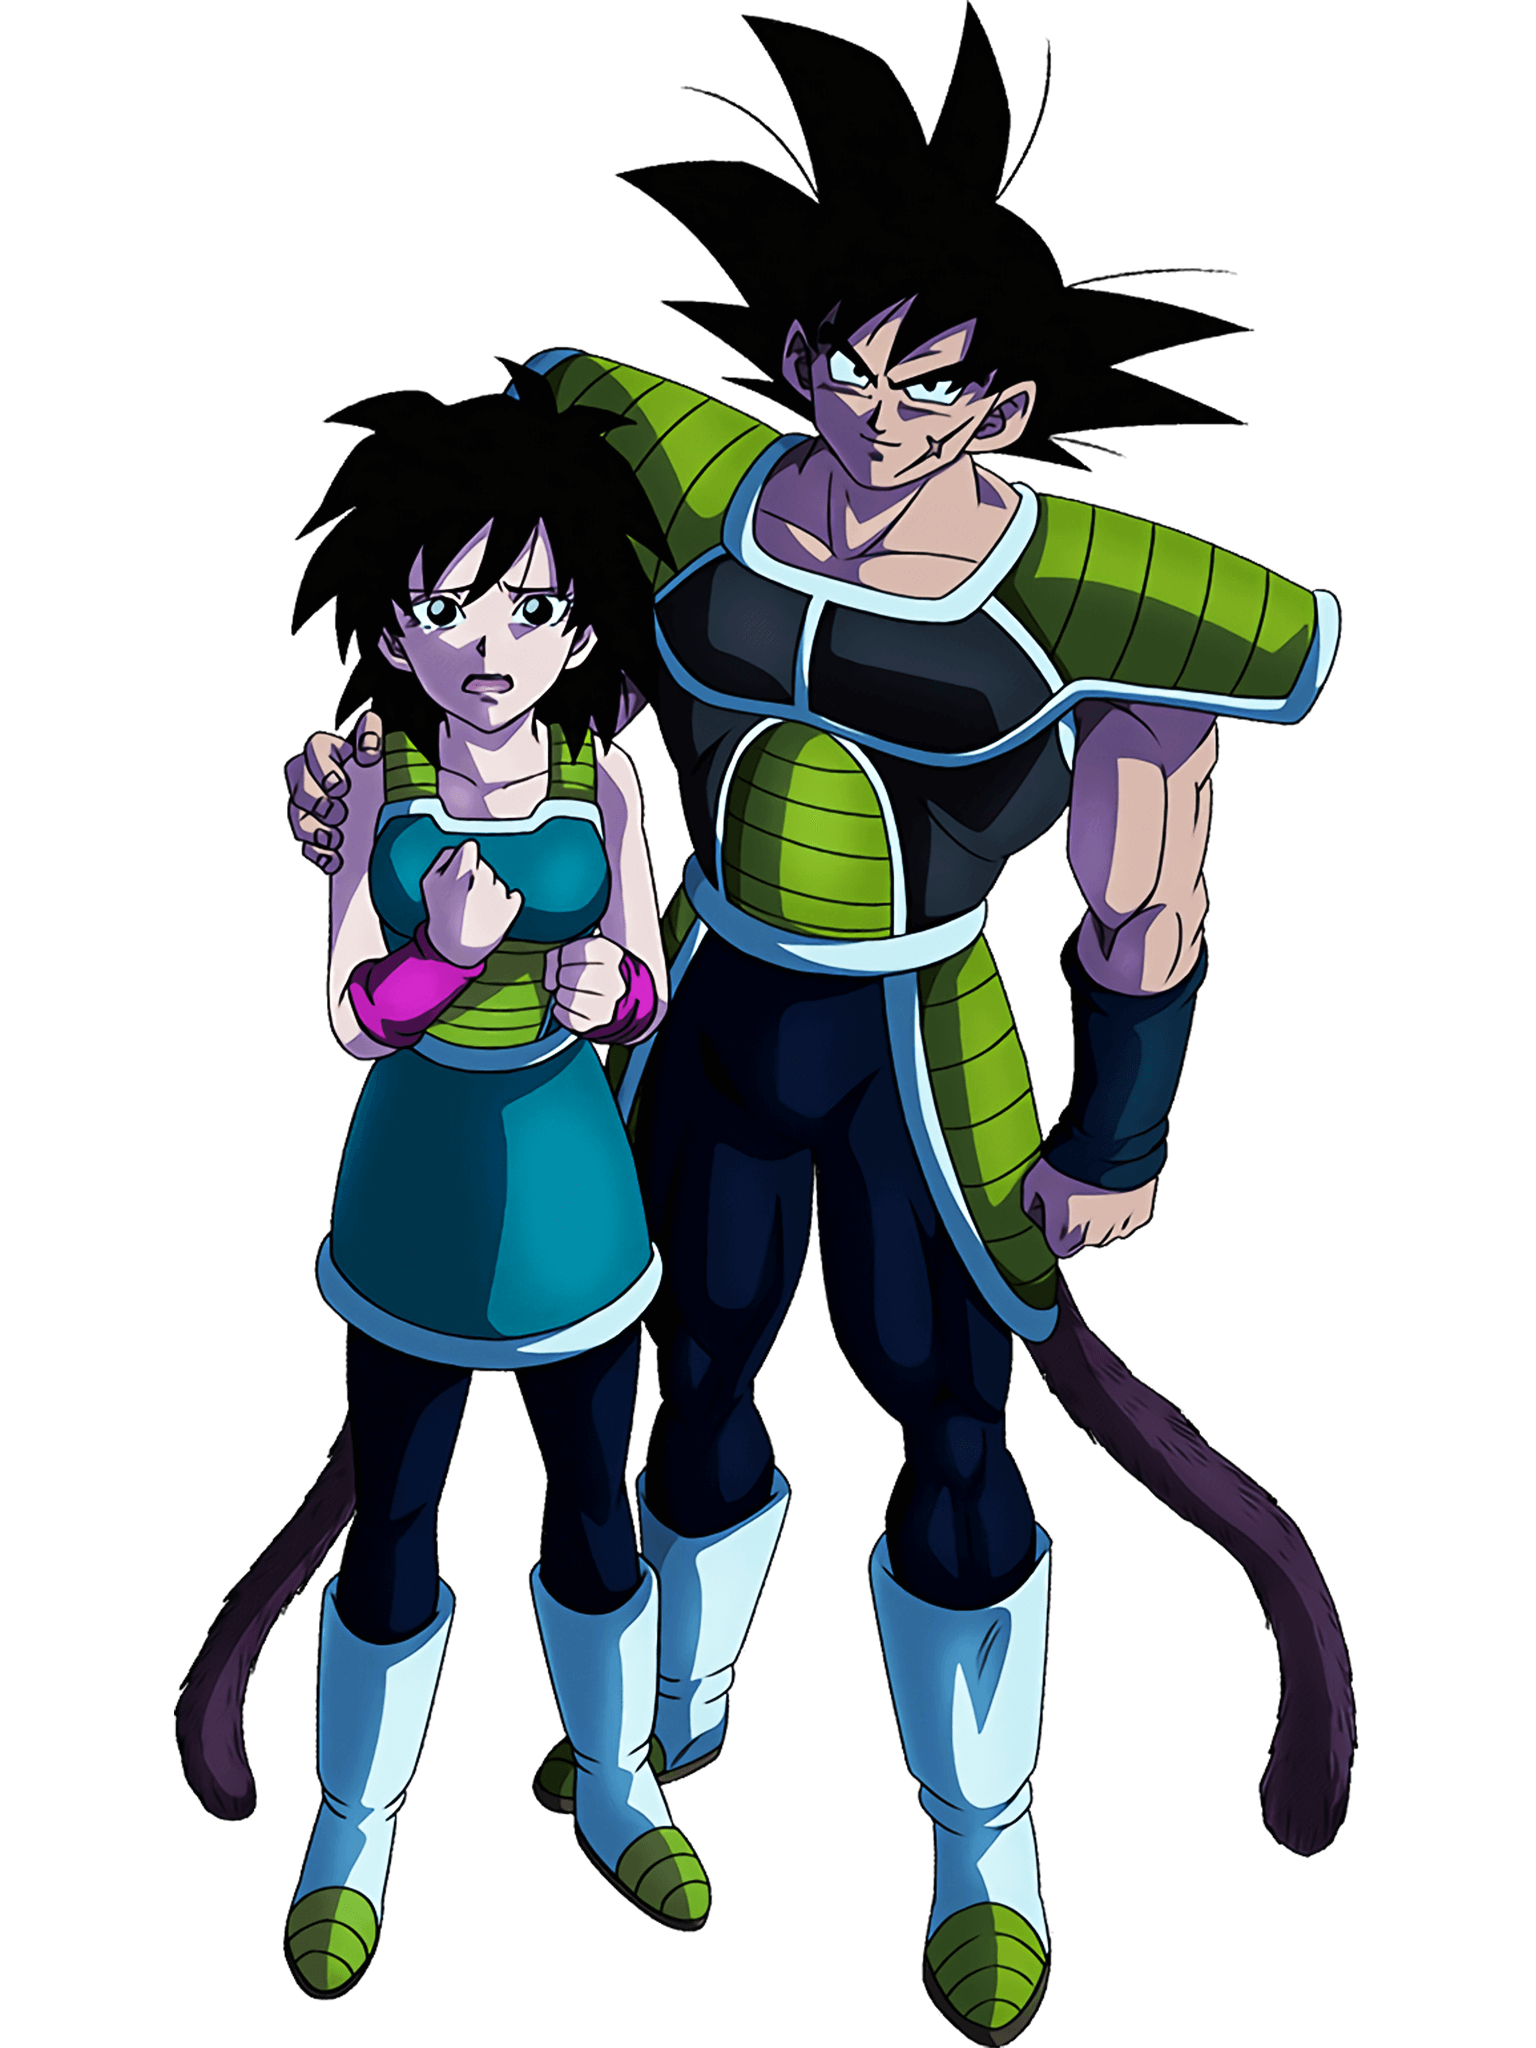 “#DokkanBattle Bardock and Gine HD Arts from Three Saiyans Driven By Fate S...